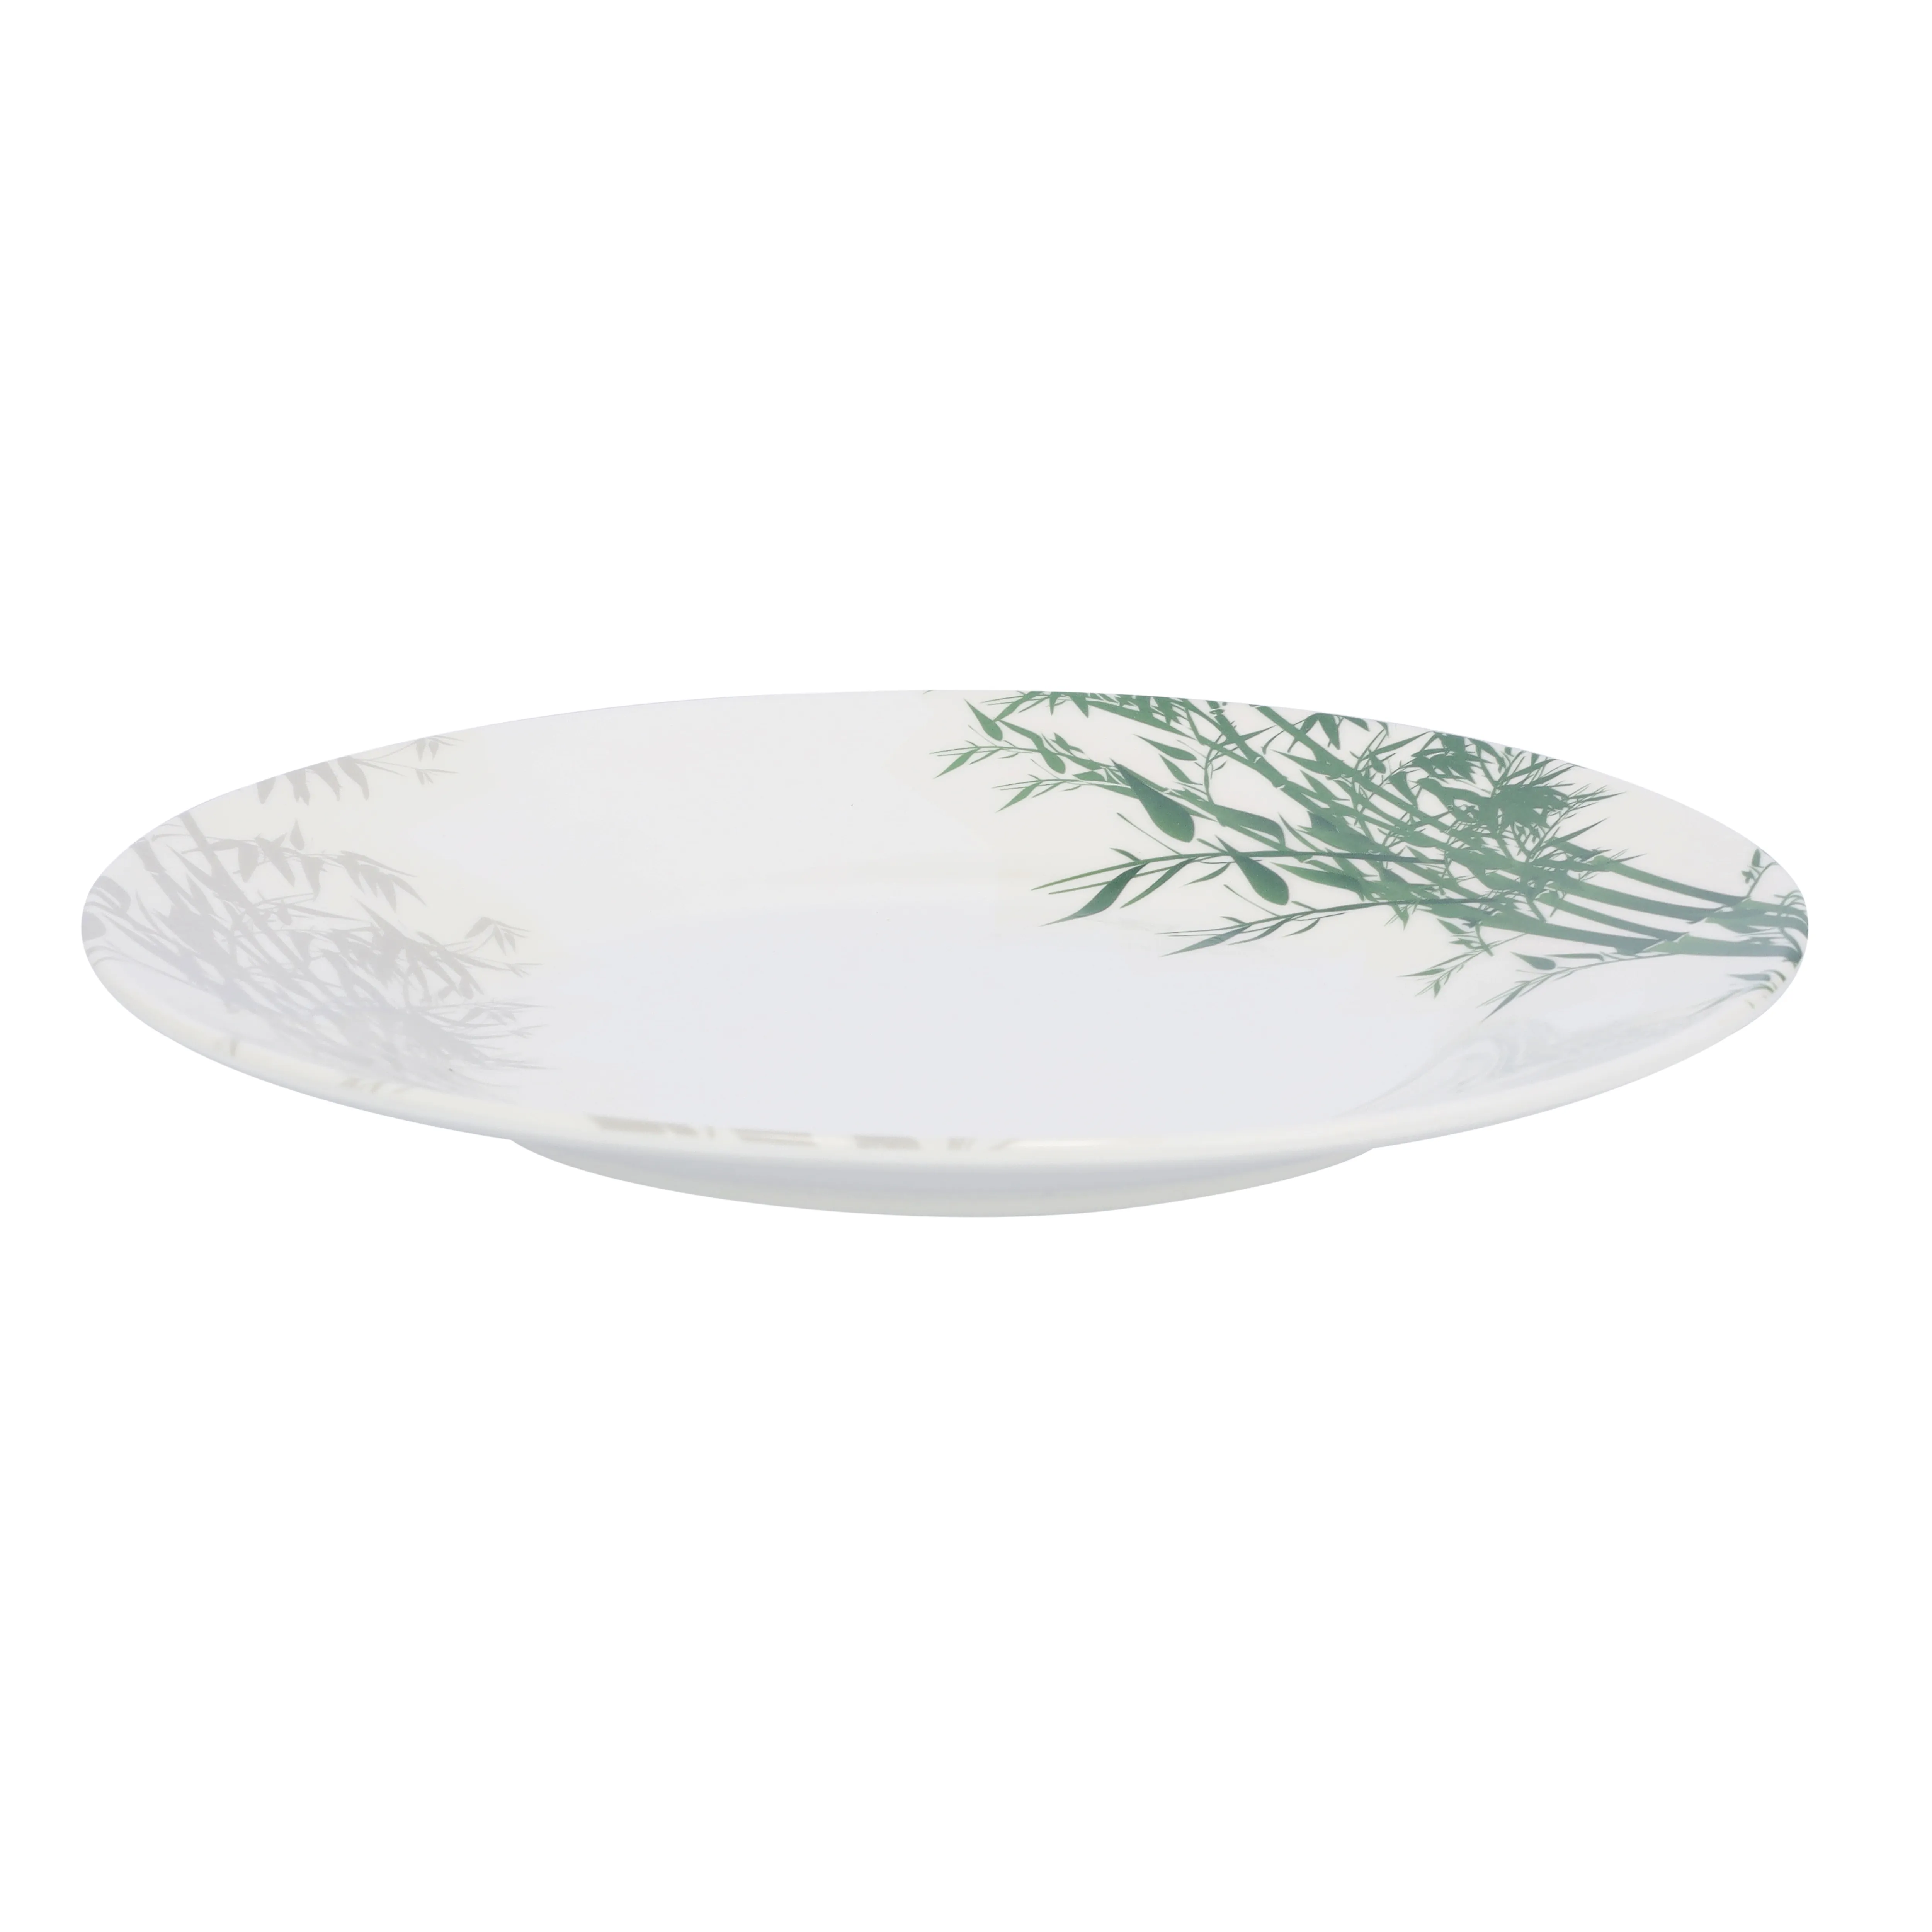 Royalford  10-inch Dinner Plate - Meal Plates Pasta Plates Plate with Elegant Bamboo Design Deep Plate Dining Party Restaurant Round Serving Dish for Steak, Pizza, Salad, Pasta, Pie & More